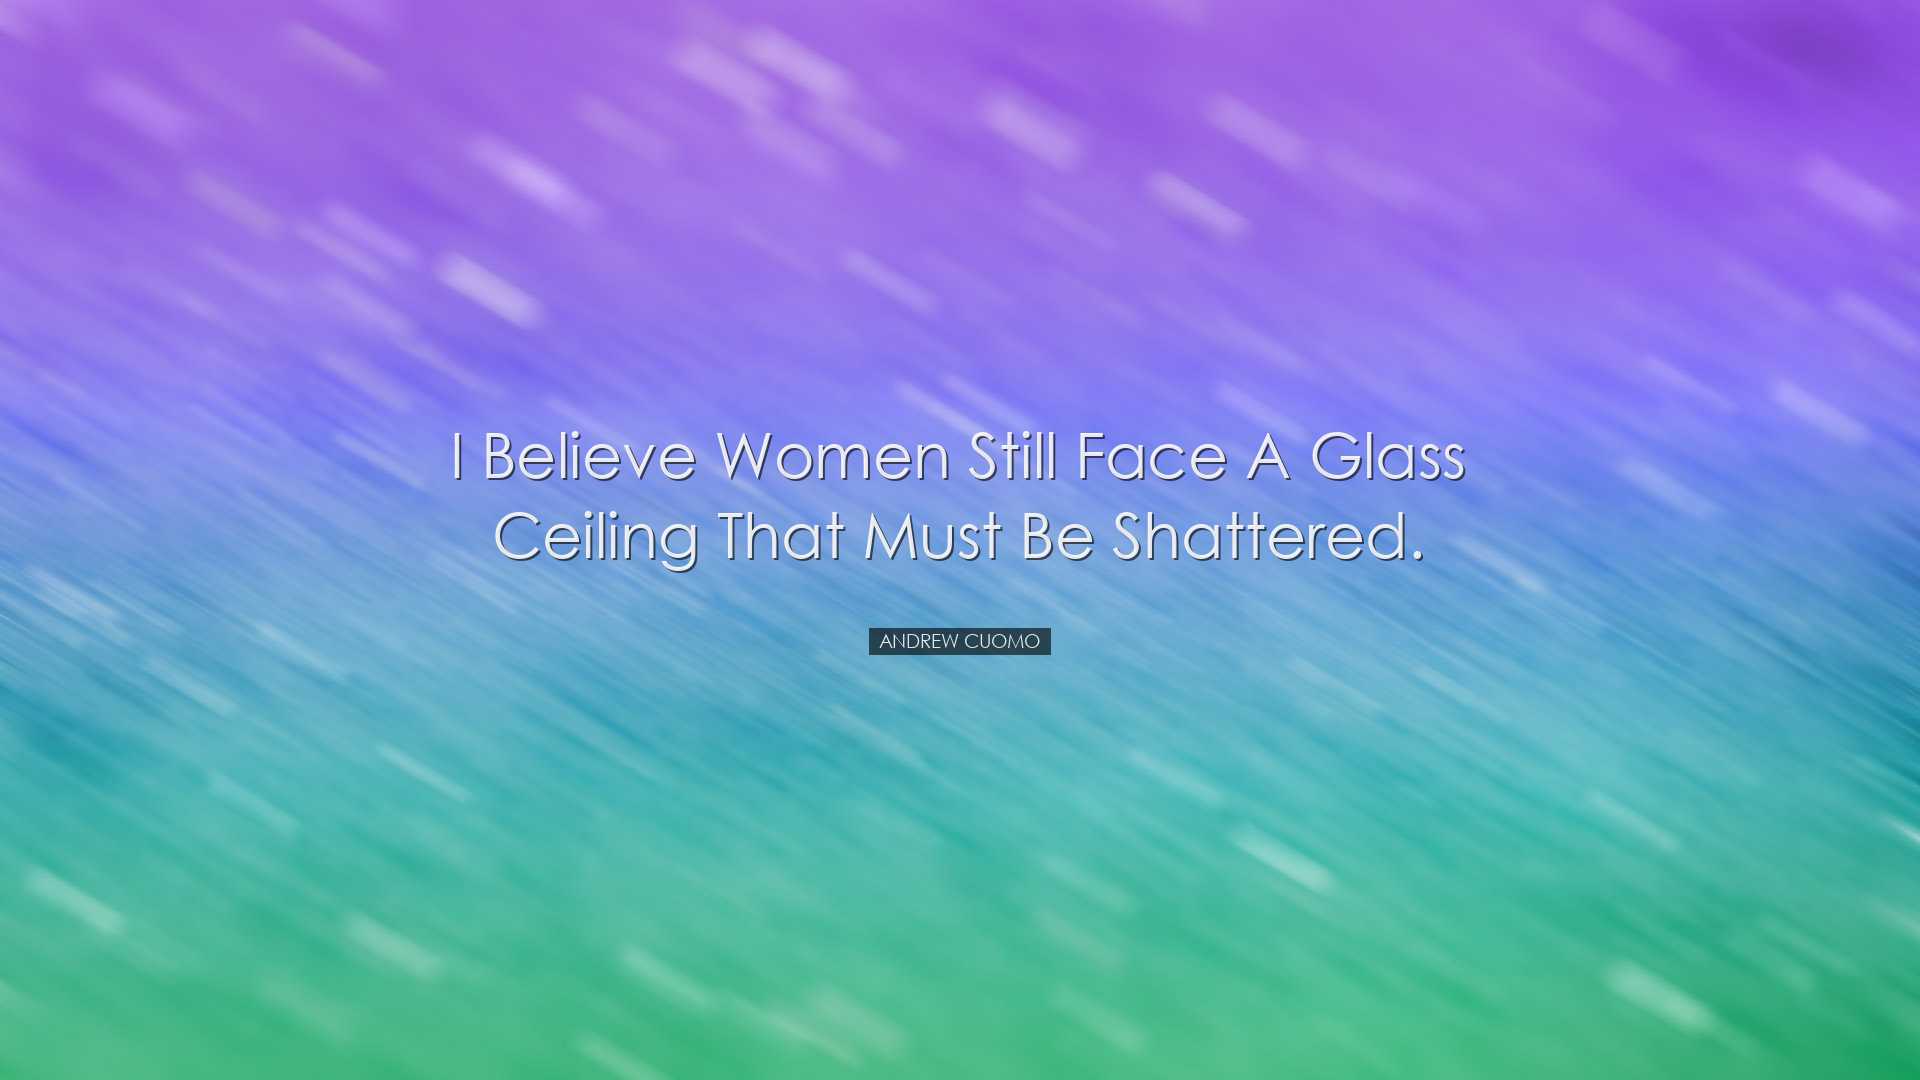 I believe women still face a glass ceiling that must be shattered.